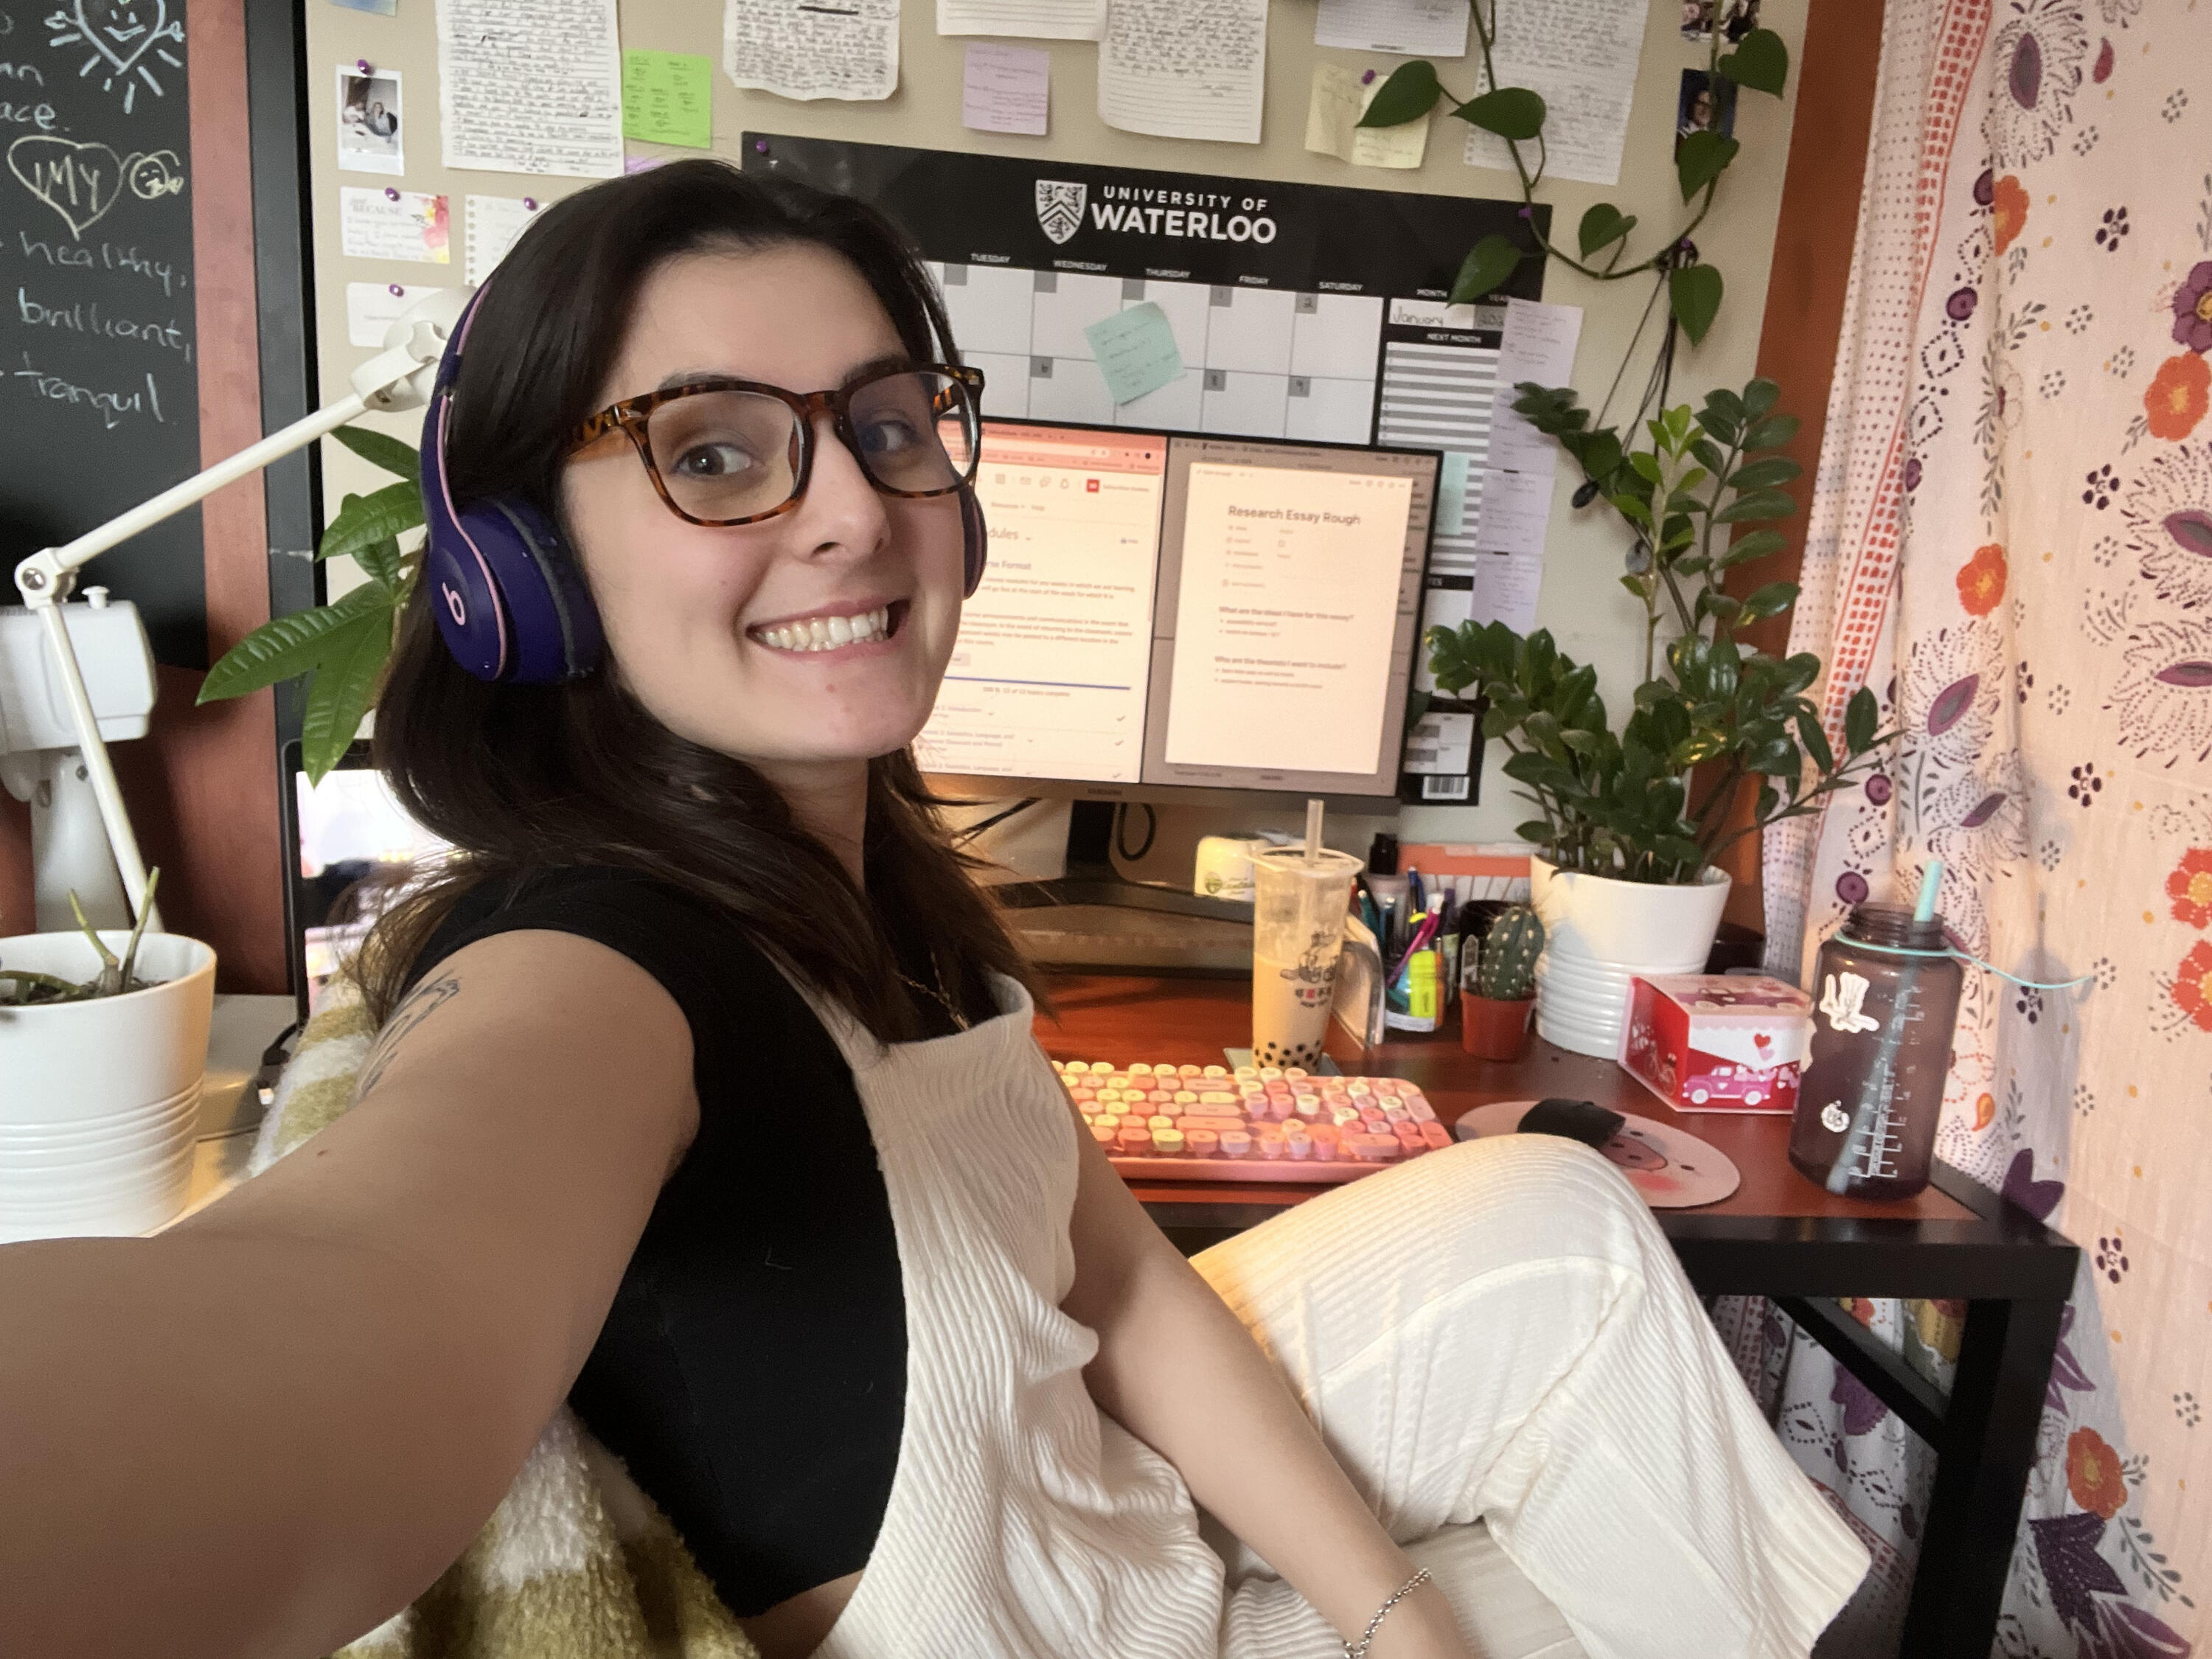 A photo of Sydney sitting at her work desk, smiling and wearing headphones.